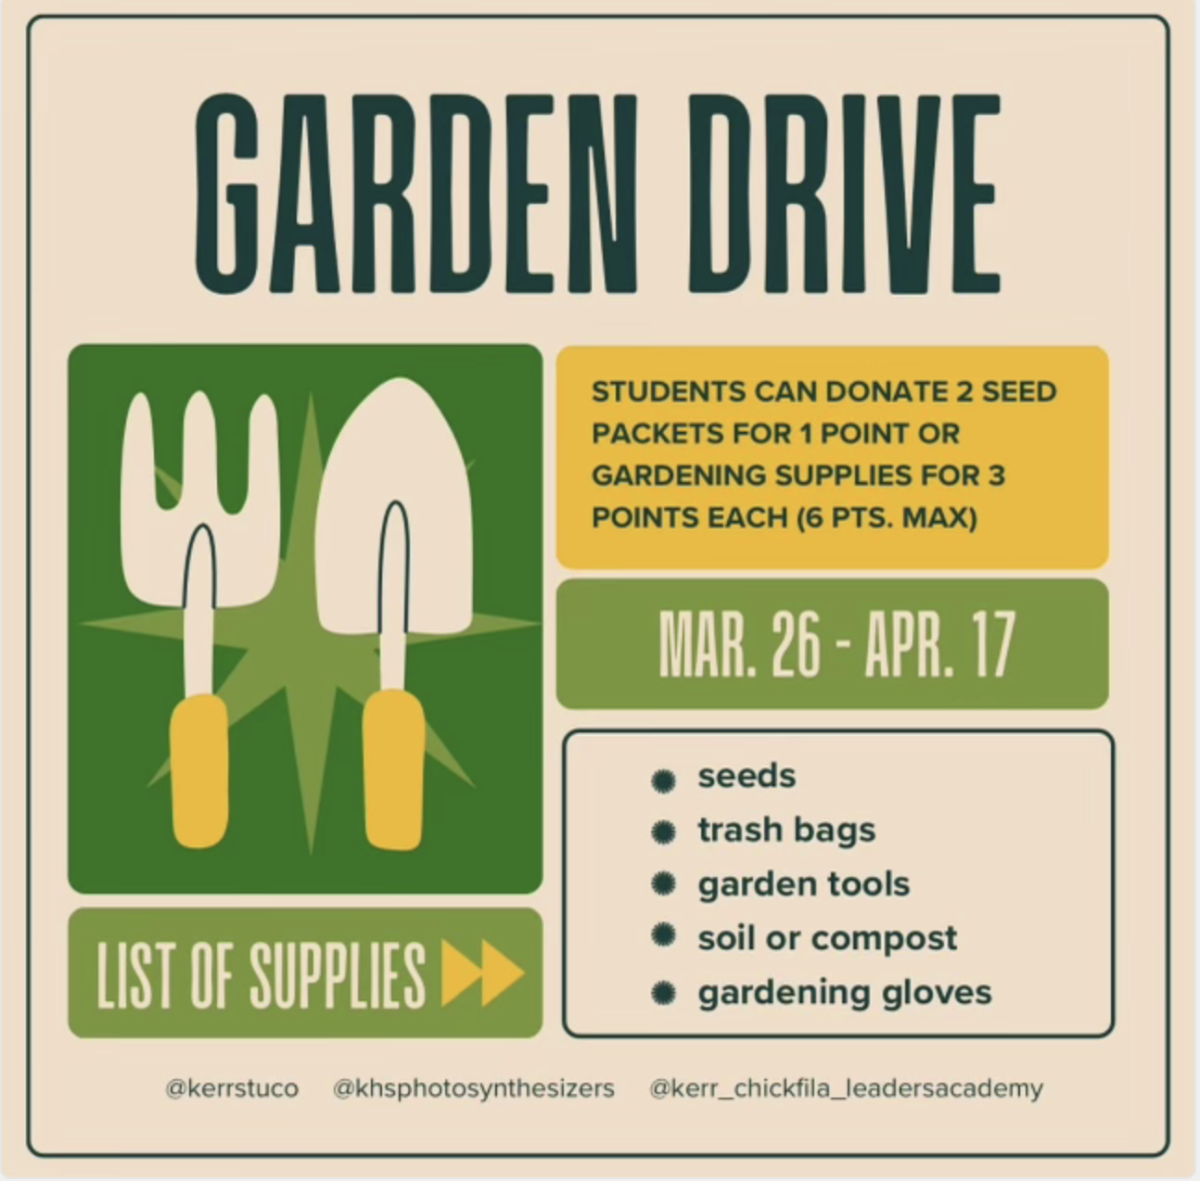 Student+Council+Collaboration%3A+Garden+Drive.+Working+with+Photosynthesizers+and+Chickfila+Leaders+Academy%2C+all+participants+can+work+towards+making+the+scenery+at+school+more+appealing+to+the+eye+by+donating+garden+supplies.+Members+can+gain+1+point+for+gardening+supplies+for+3+points+each.